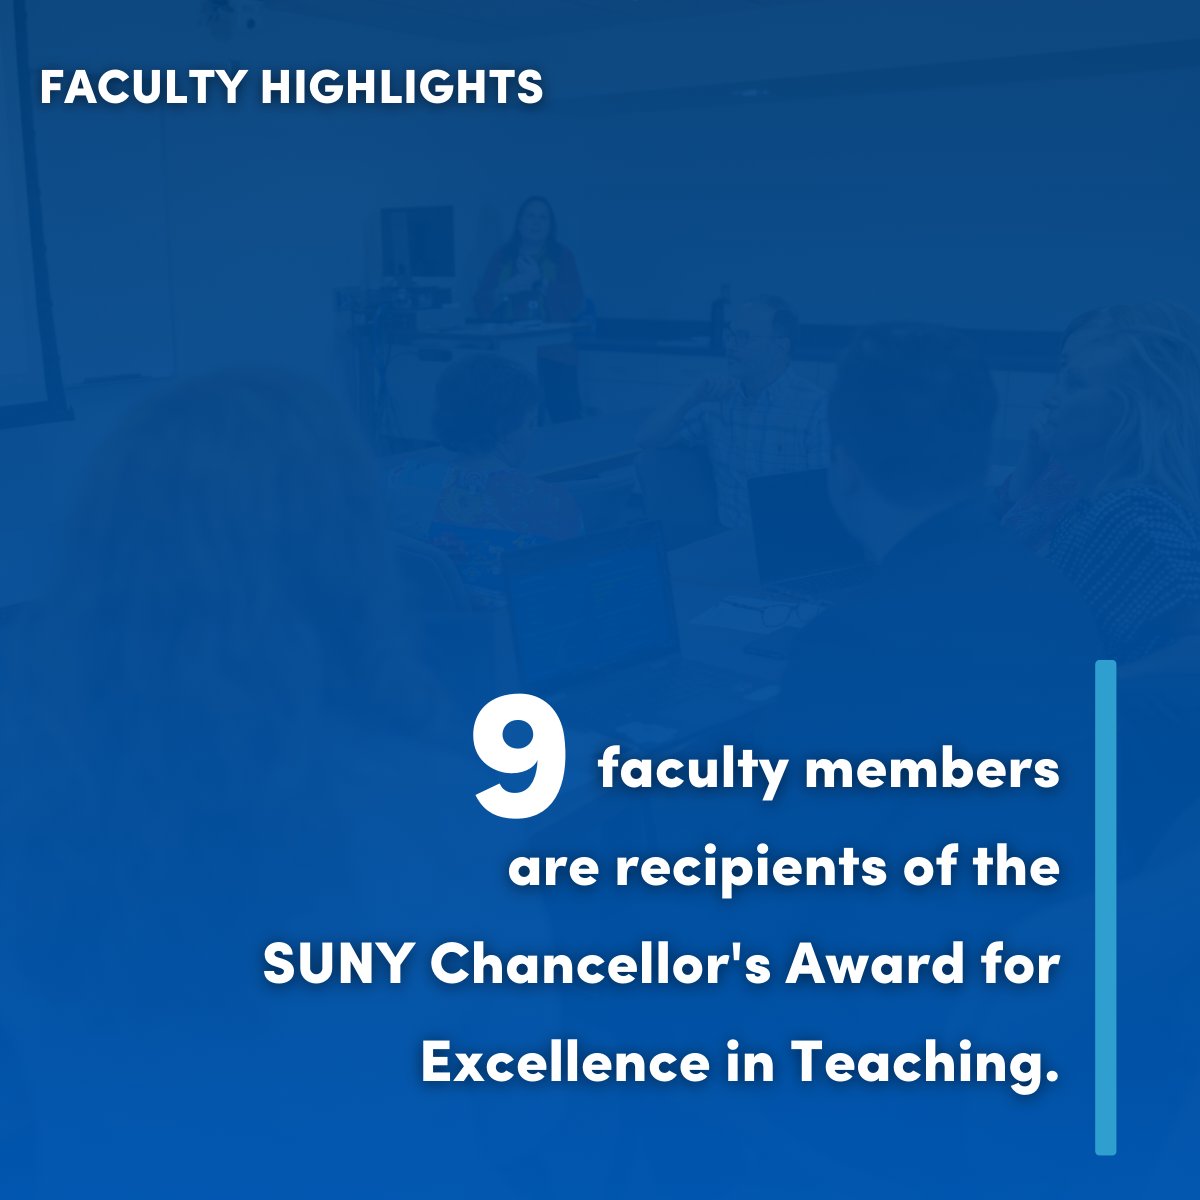 Elevating Education - Nine of our faculty members have received the SUNY Chancellor's Award for Excellence in Teaching. The award recognizes outstanding teaching ability through superb classroom performance.  
#FacultySuccess #UBMgt #FunFactFridays